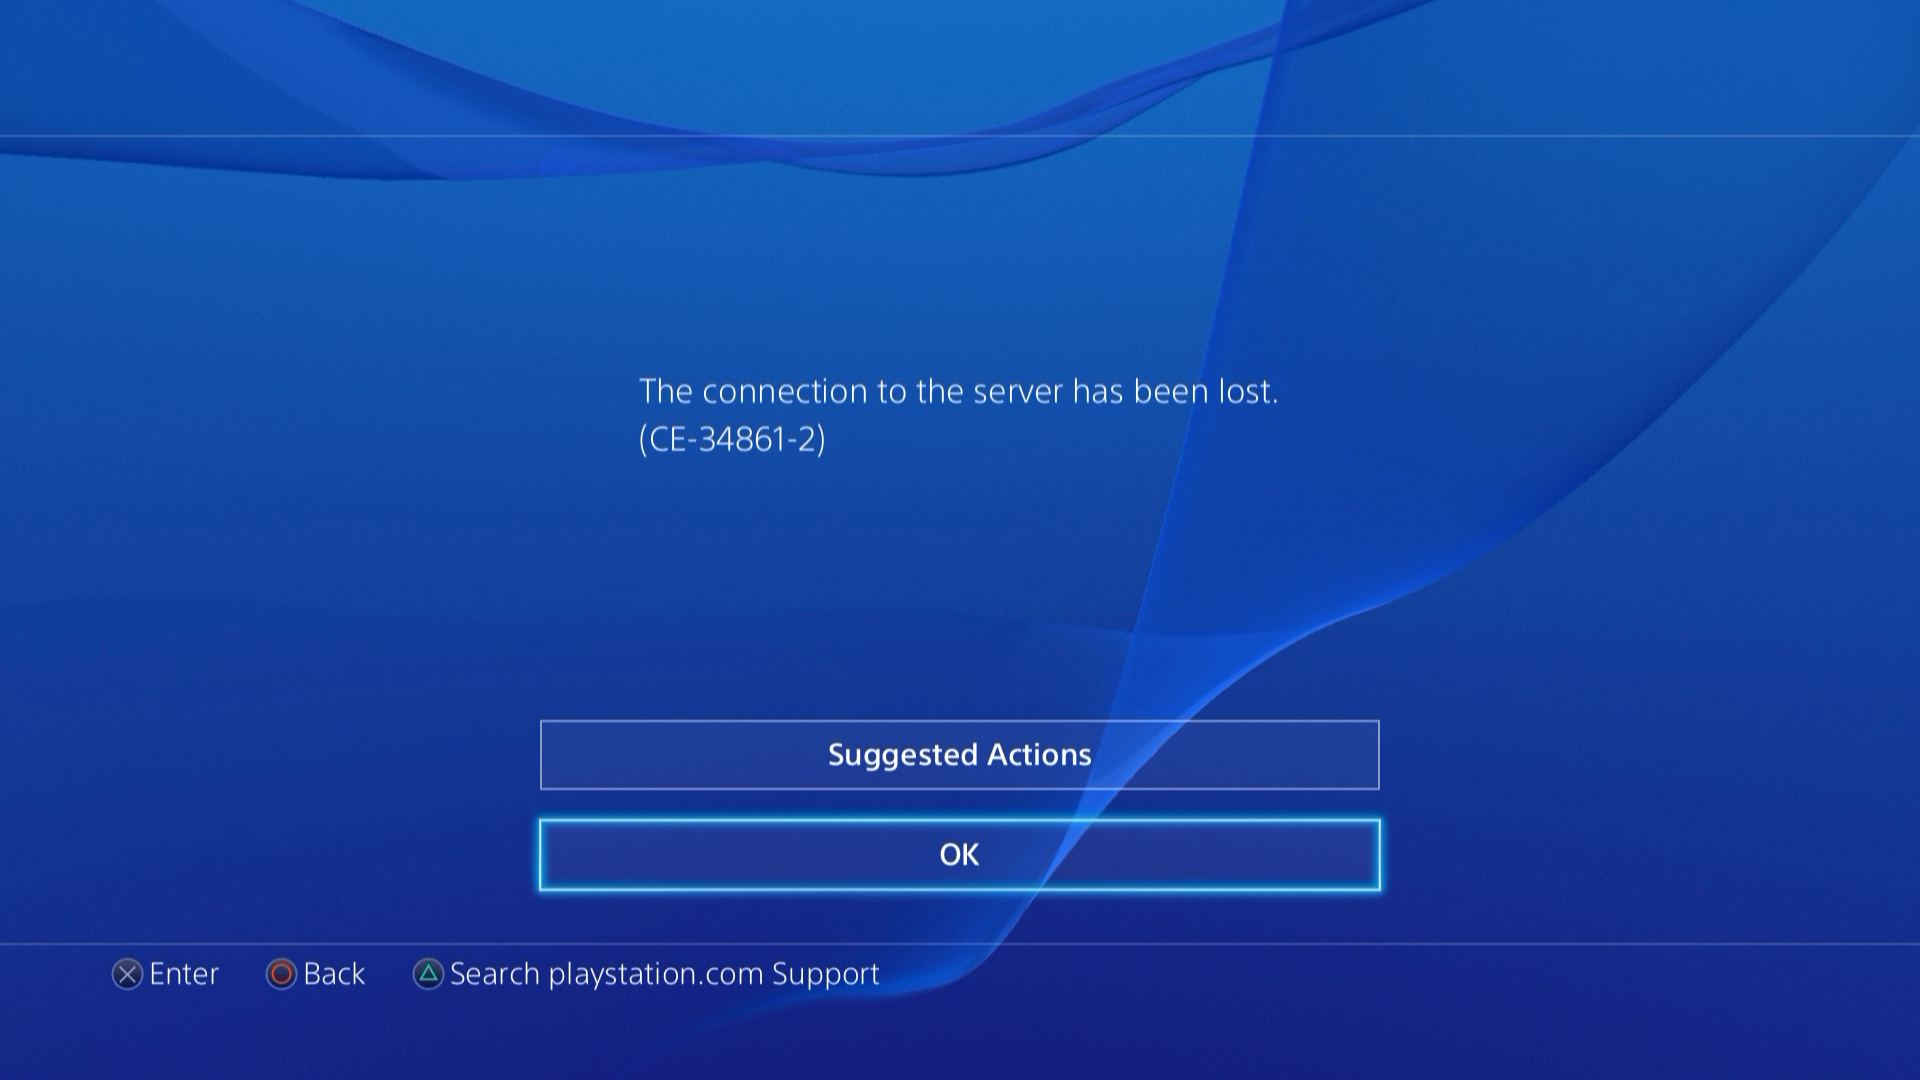 banks outage psn steam store are